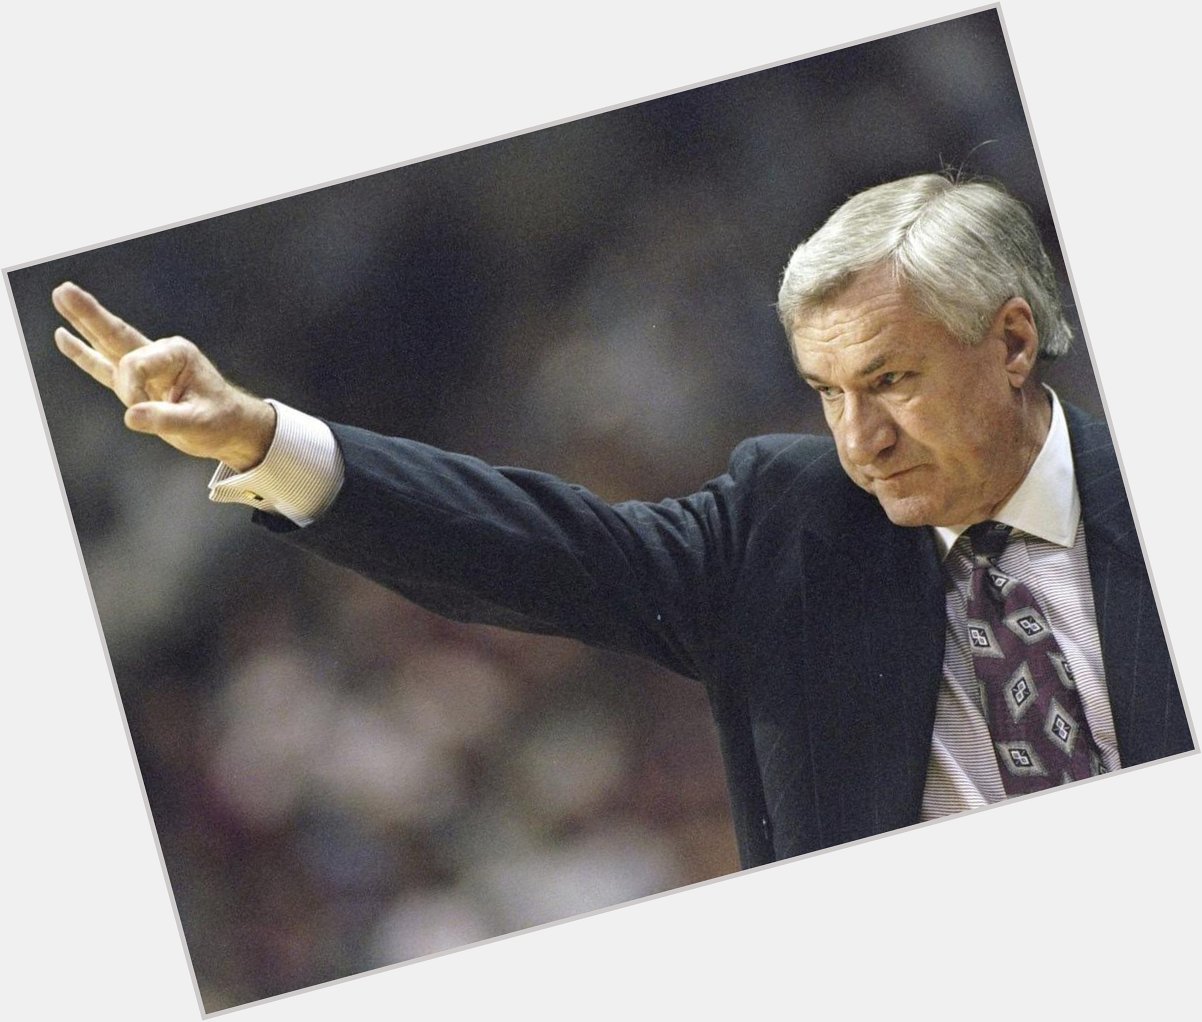 Happy birthday to a college hoops legend, Dean Smith. 